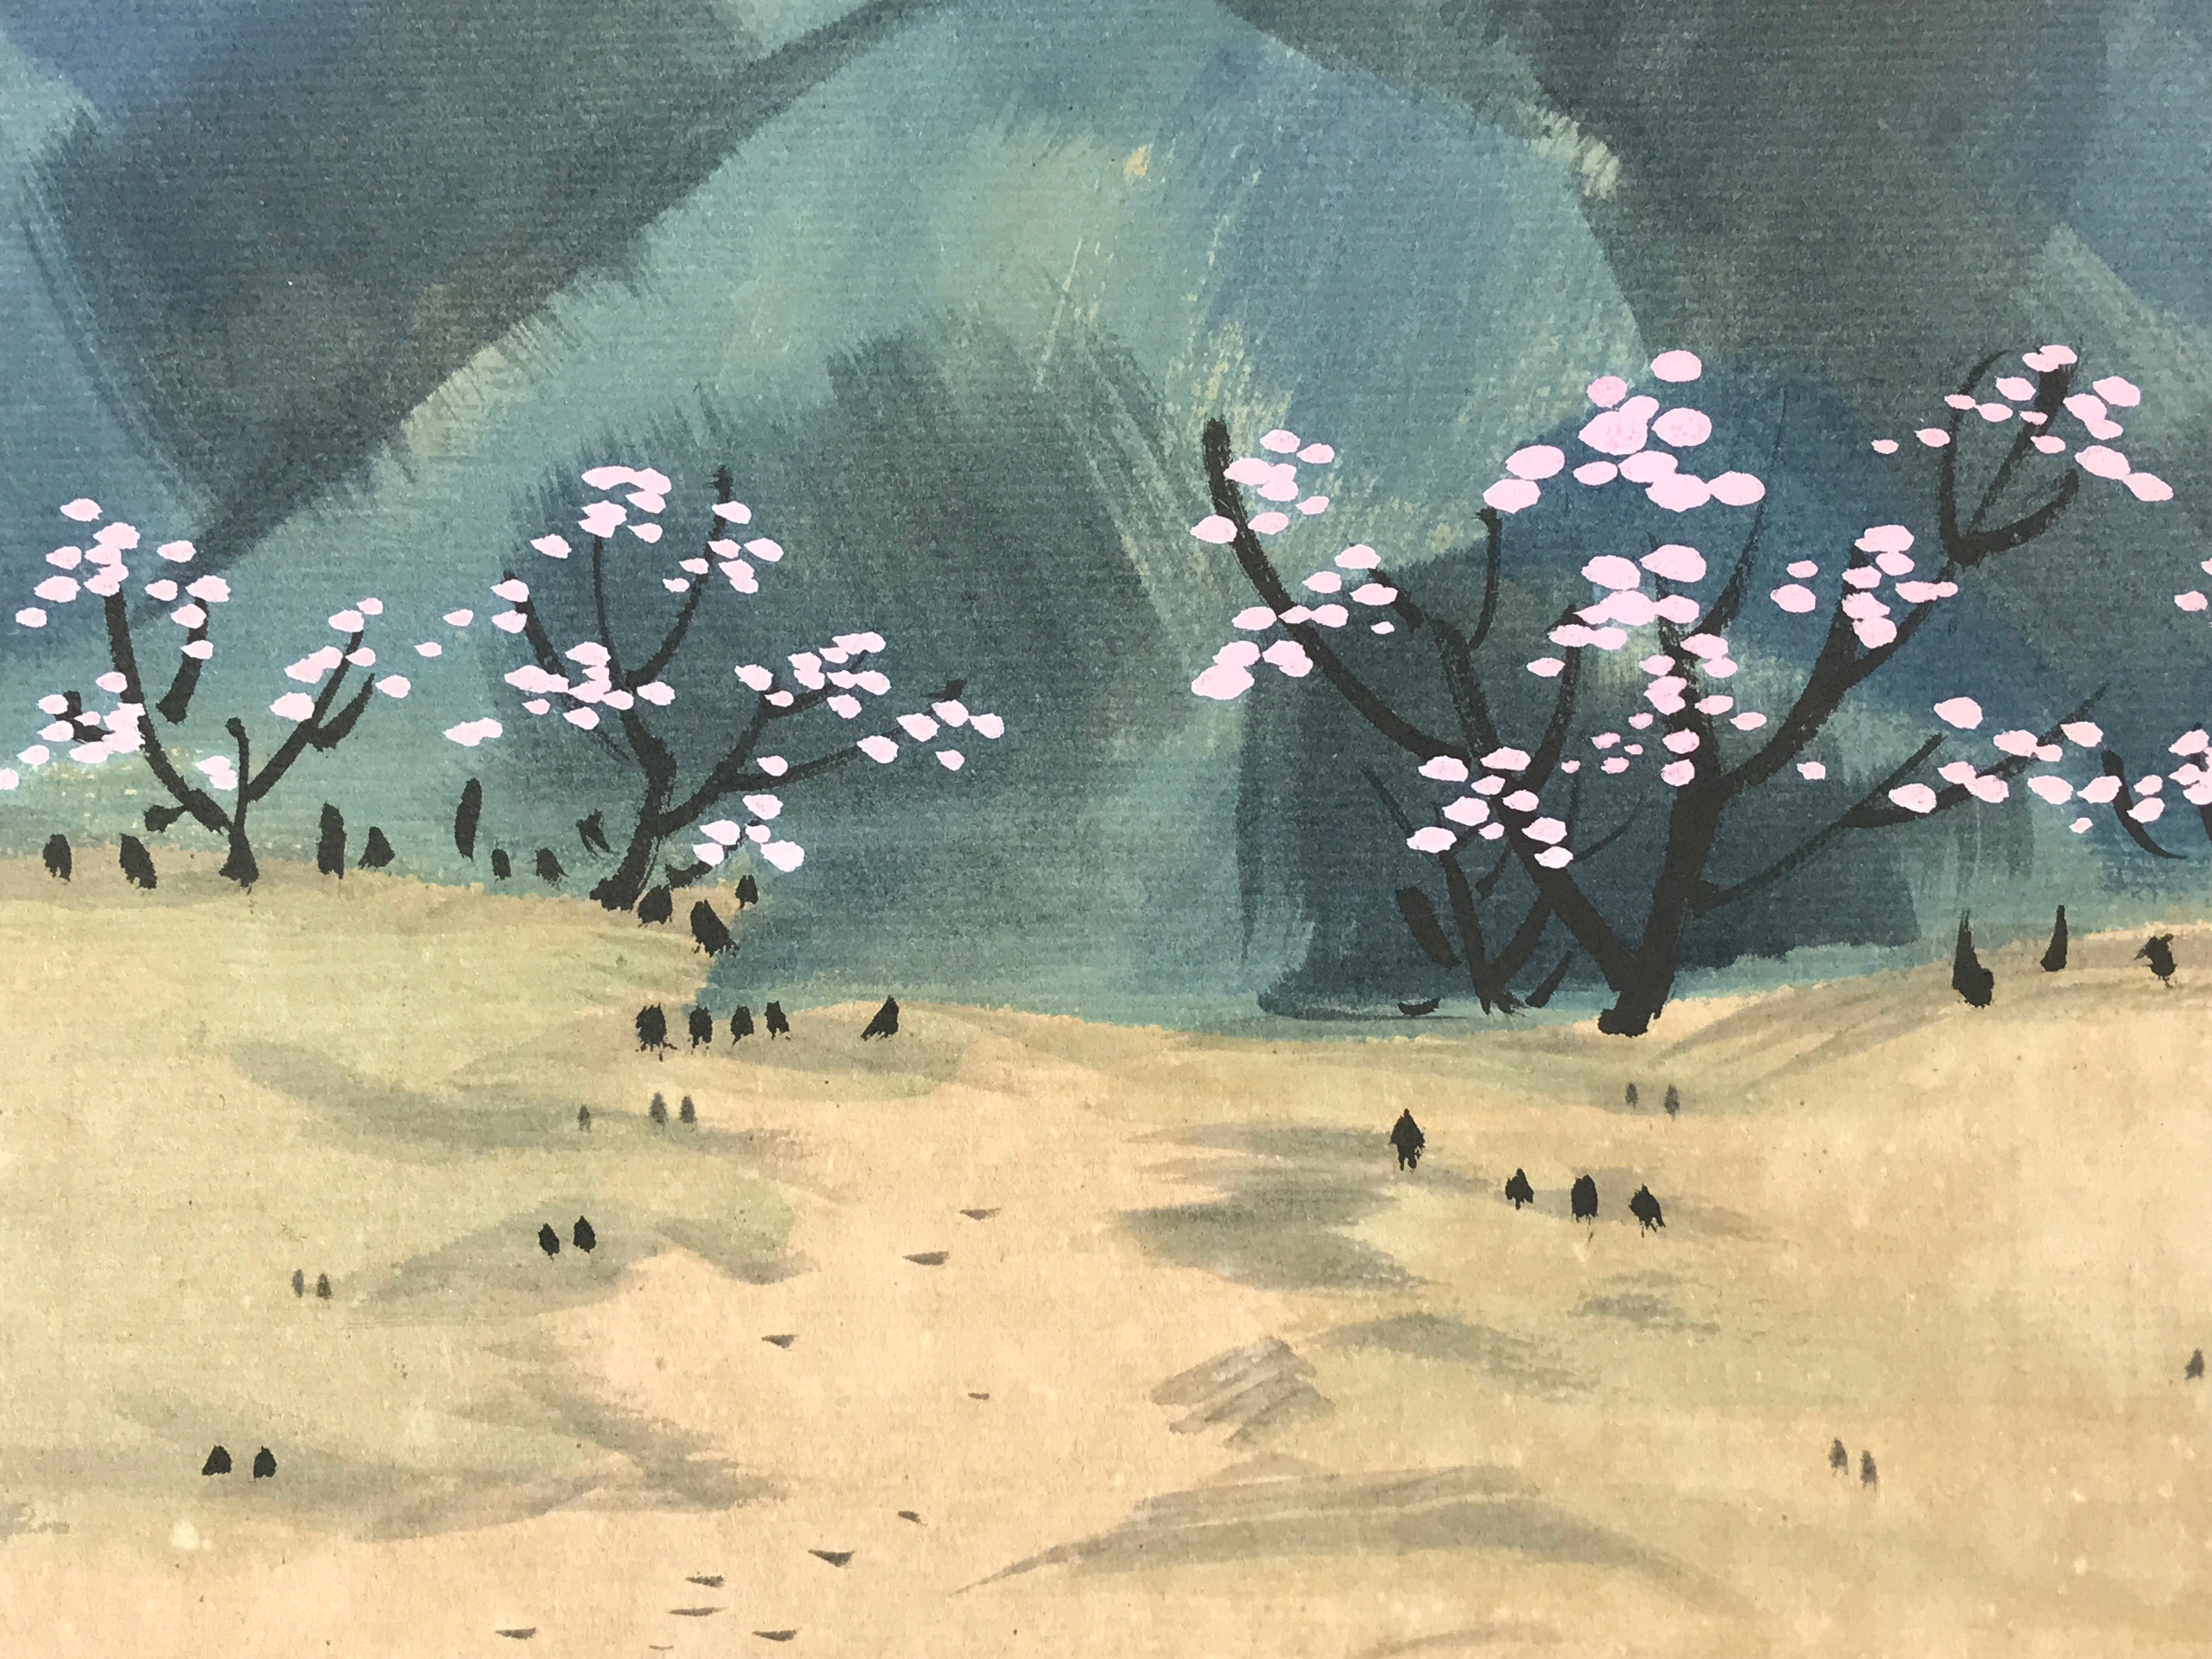 Japanese Shikishi Art Board Painting Mountain Valley Cherry Blossom Nature A586